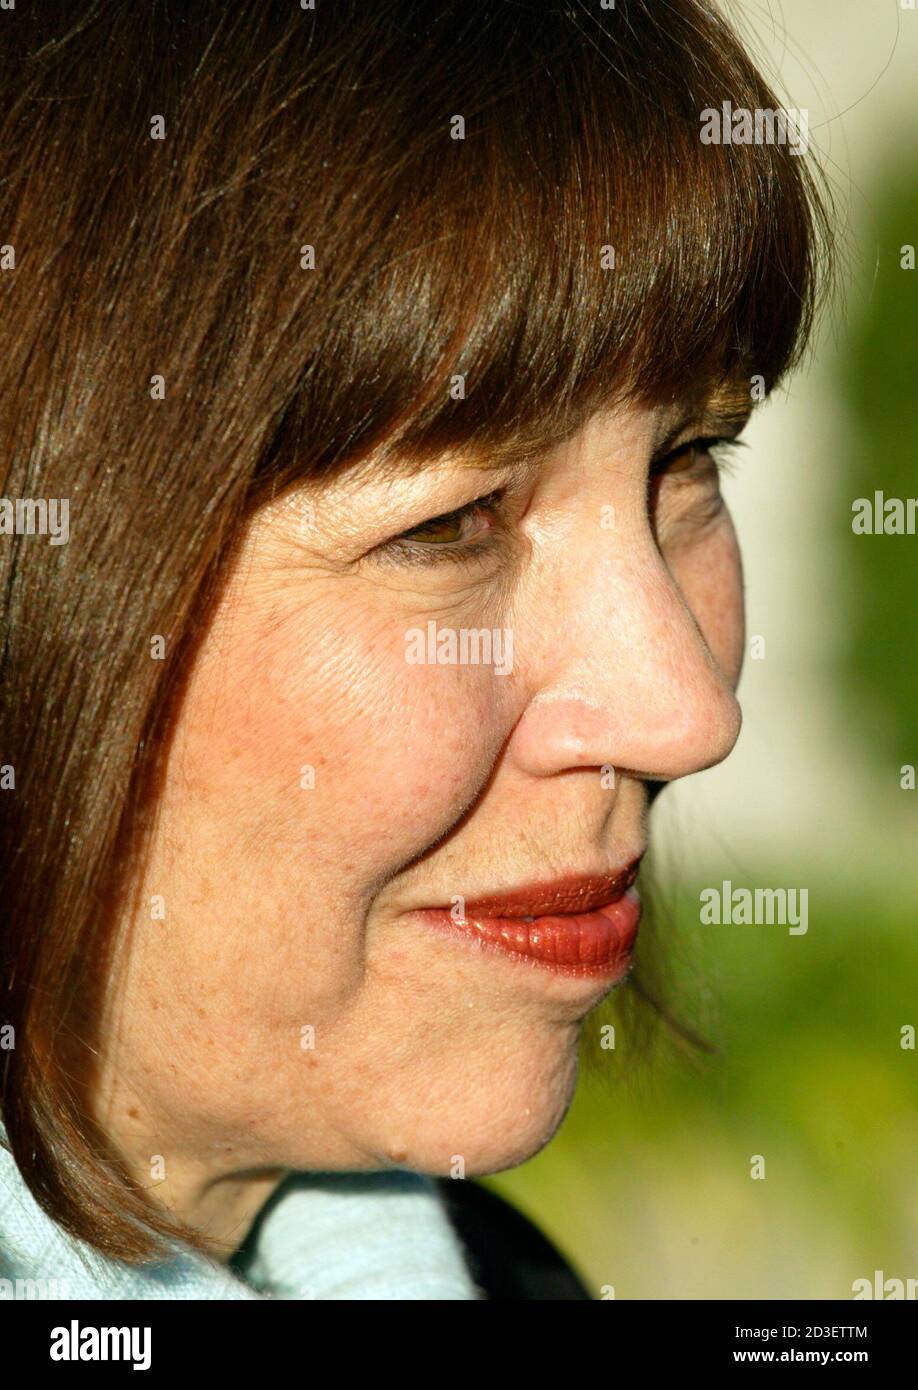 New York Times reporter Judith Miller smiles after she and Time Magazine reporter Matthew Cooper's appearance at the U.S. Court of Appeals for the District of Columbia in Washington, December 8, 2004. Cooper and Miller are two reporters facing up to 18 months in jail for refusing to testify about their contacts with confidential sources relating to the story about the unnamed Bush administration sources about the release of the name of CIA official Valerie Plame to the media 16 months ago. REUTERS/Yuri Gripas  YG Stock Photo